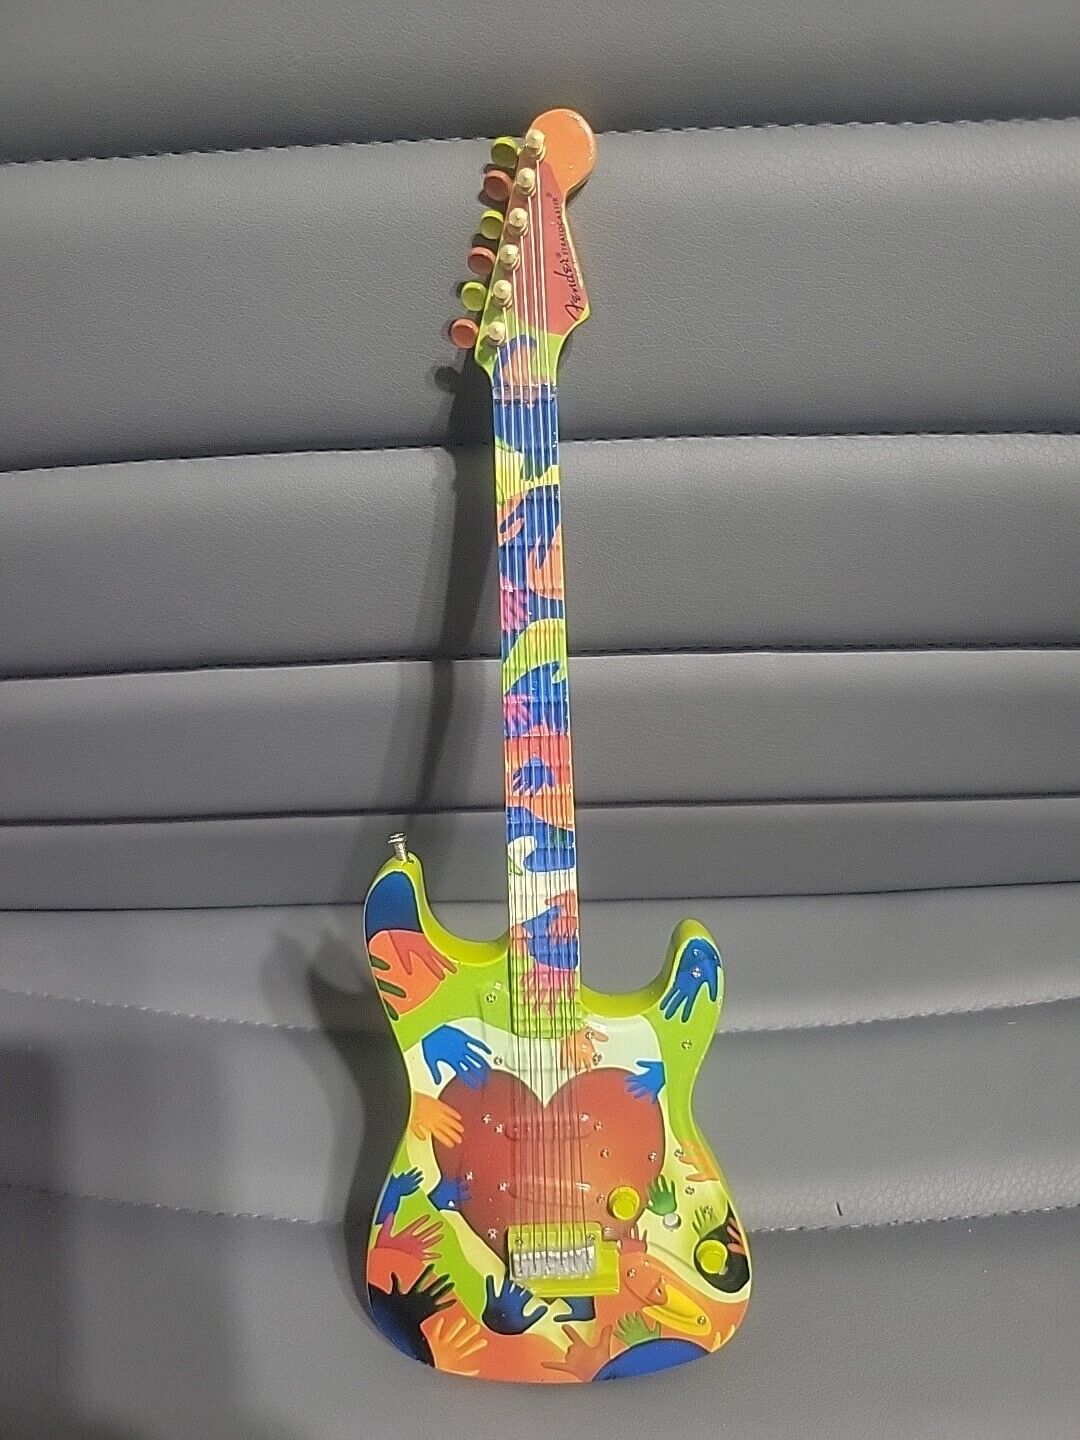 Fender Painted Guitar Collectible Figurine By Guitar  Mania 2004 10”